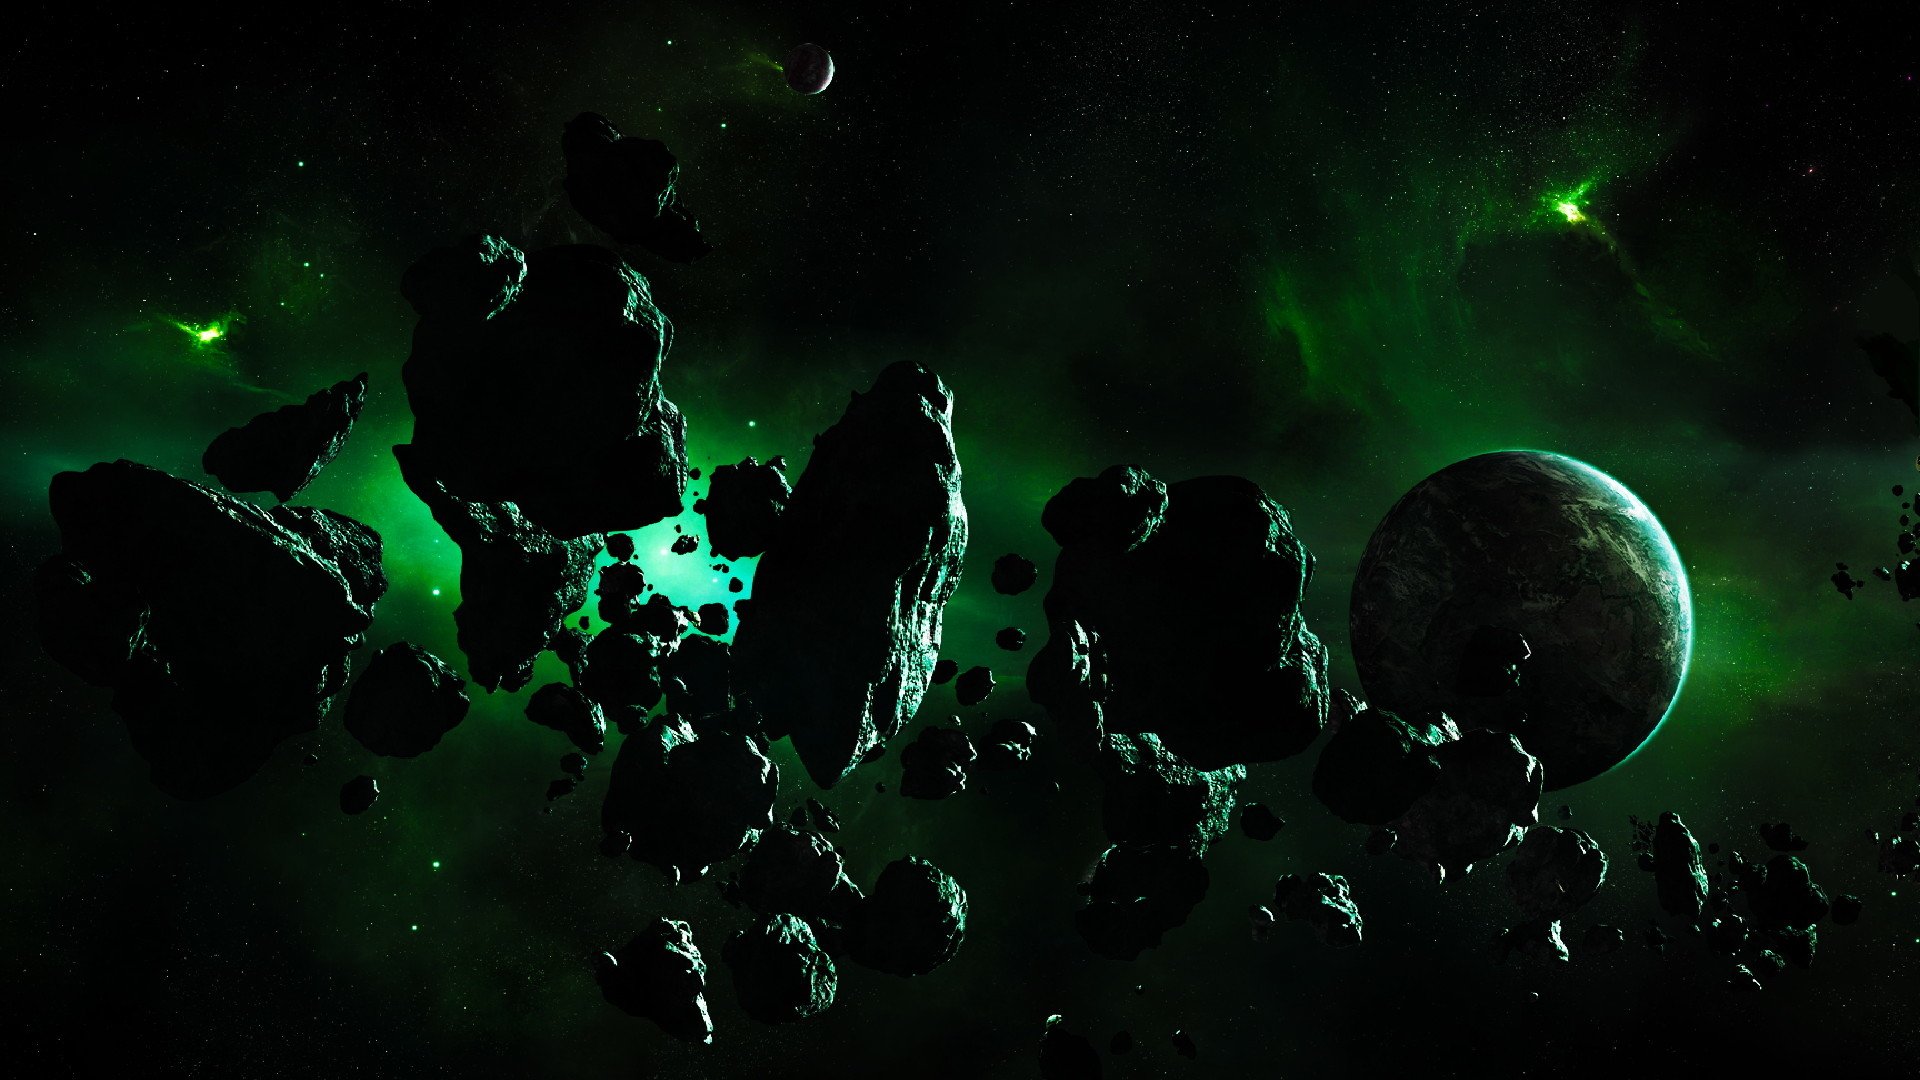 Asteroid Background Image HD Wallpaper